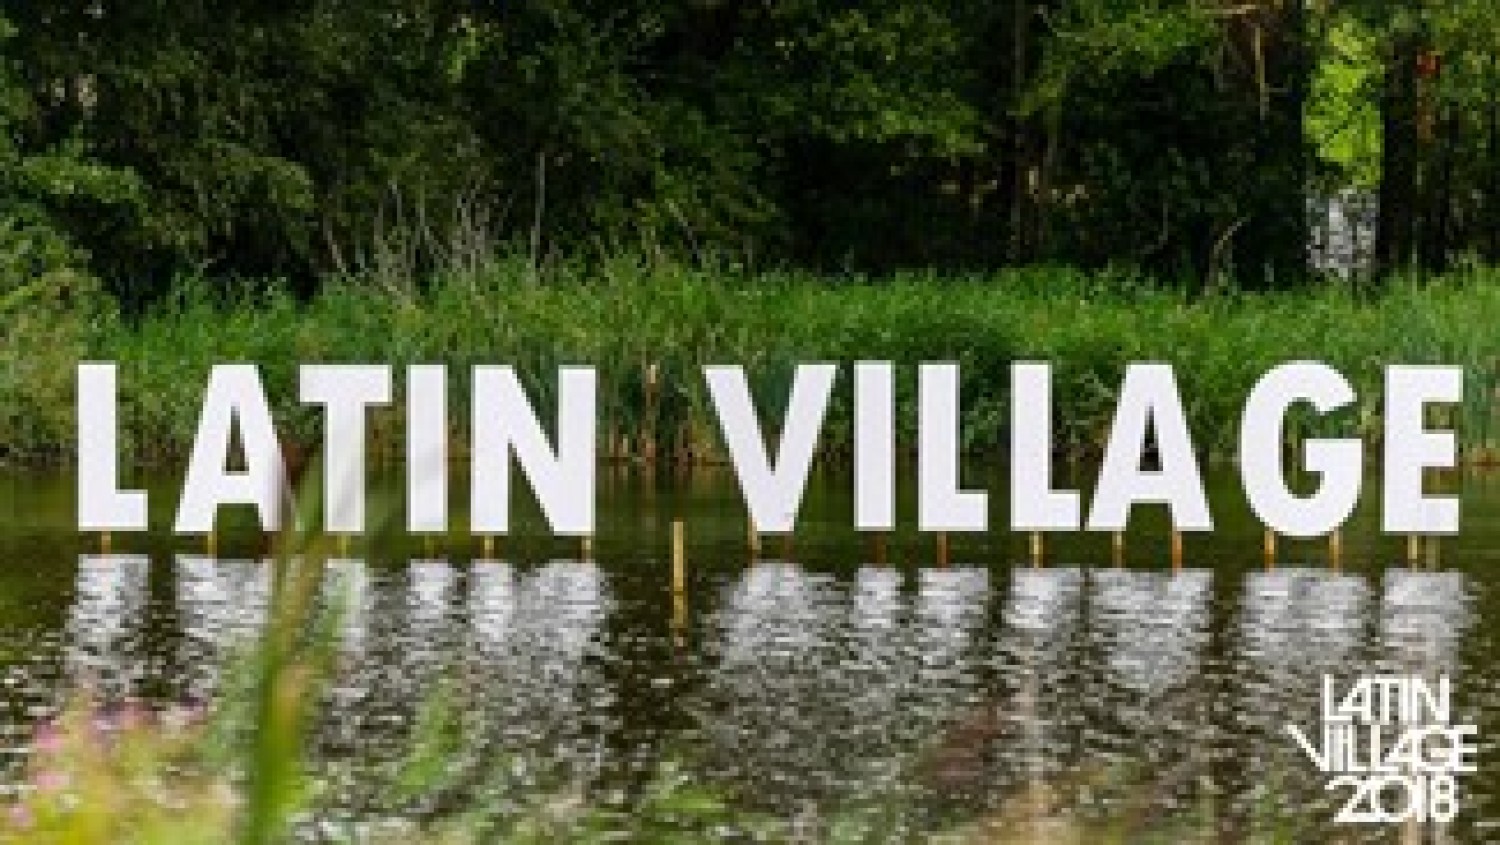 Party report: LatinVillage Festival, Spaarnwoude (19-08-2018)